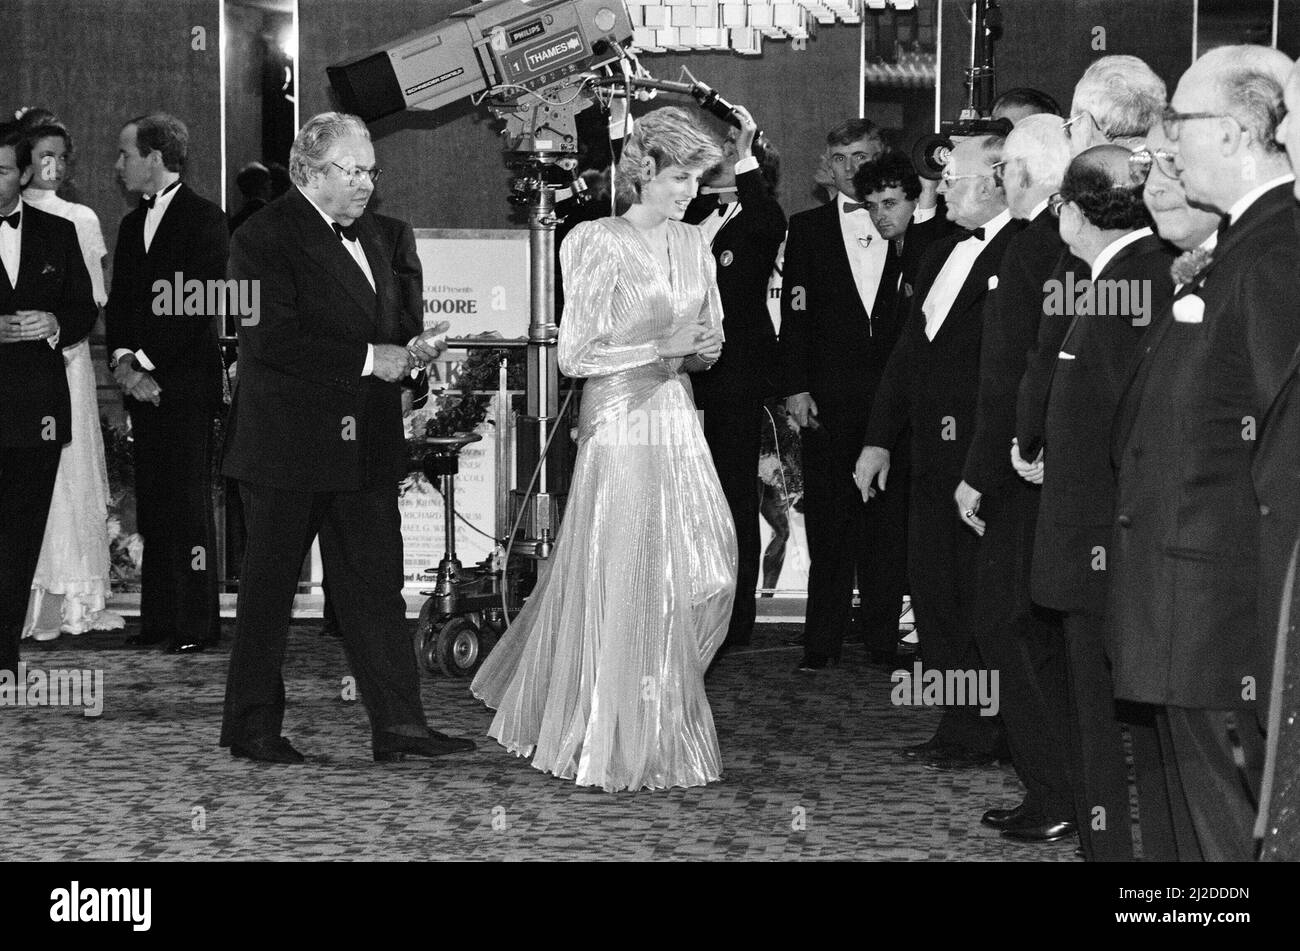 HRH The Princess of Wales, Princess Diana attends The Royal Premiere of the 14th 007 James Bond Movie, 'A View To A Kill'  at the Odeon Cinema, Leicester Square, LondonPrincess Diana wears a stunning silver Bruce Oldfield dress.  Picture taken 14th June 1985 Stock Photo